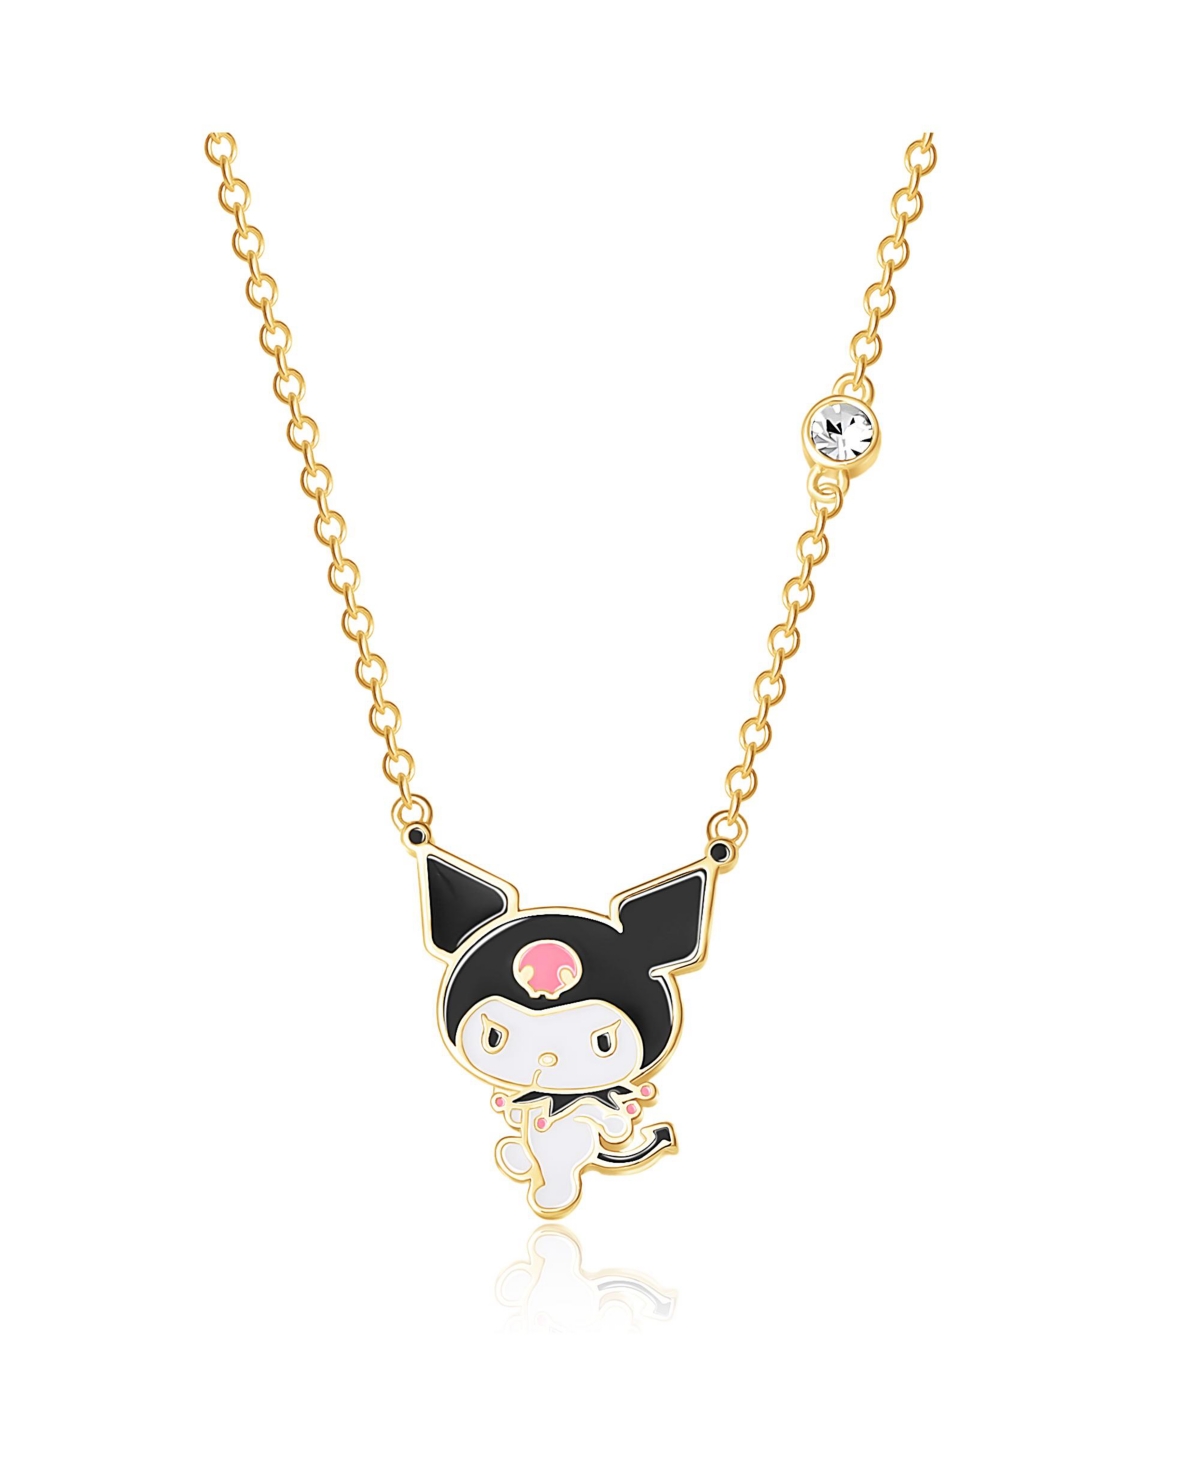 Sanrio Hello Kitty Yellow Gold Plated Crystal Kuromi Necklace - 18'' Chain, Officially Licensed Authentic - Black, white